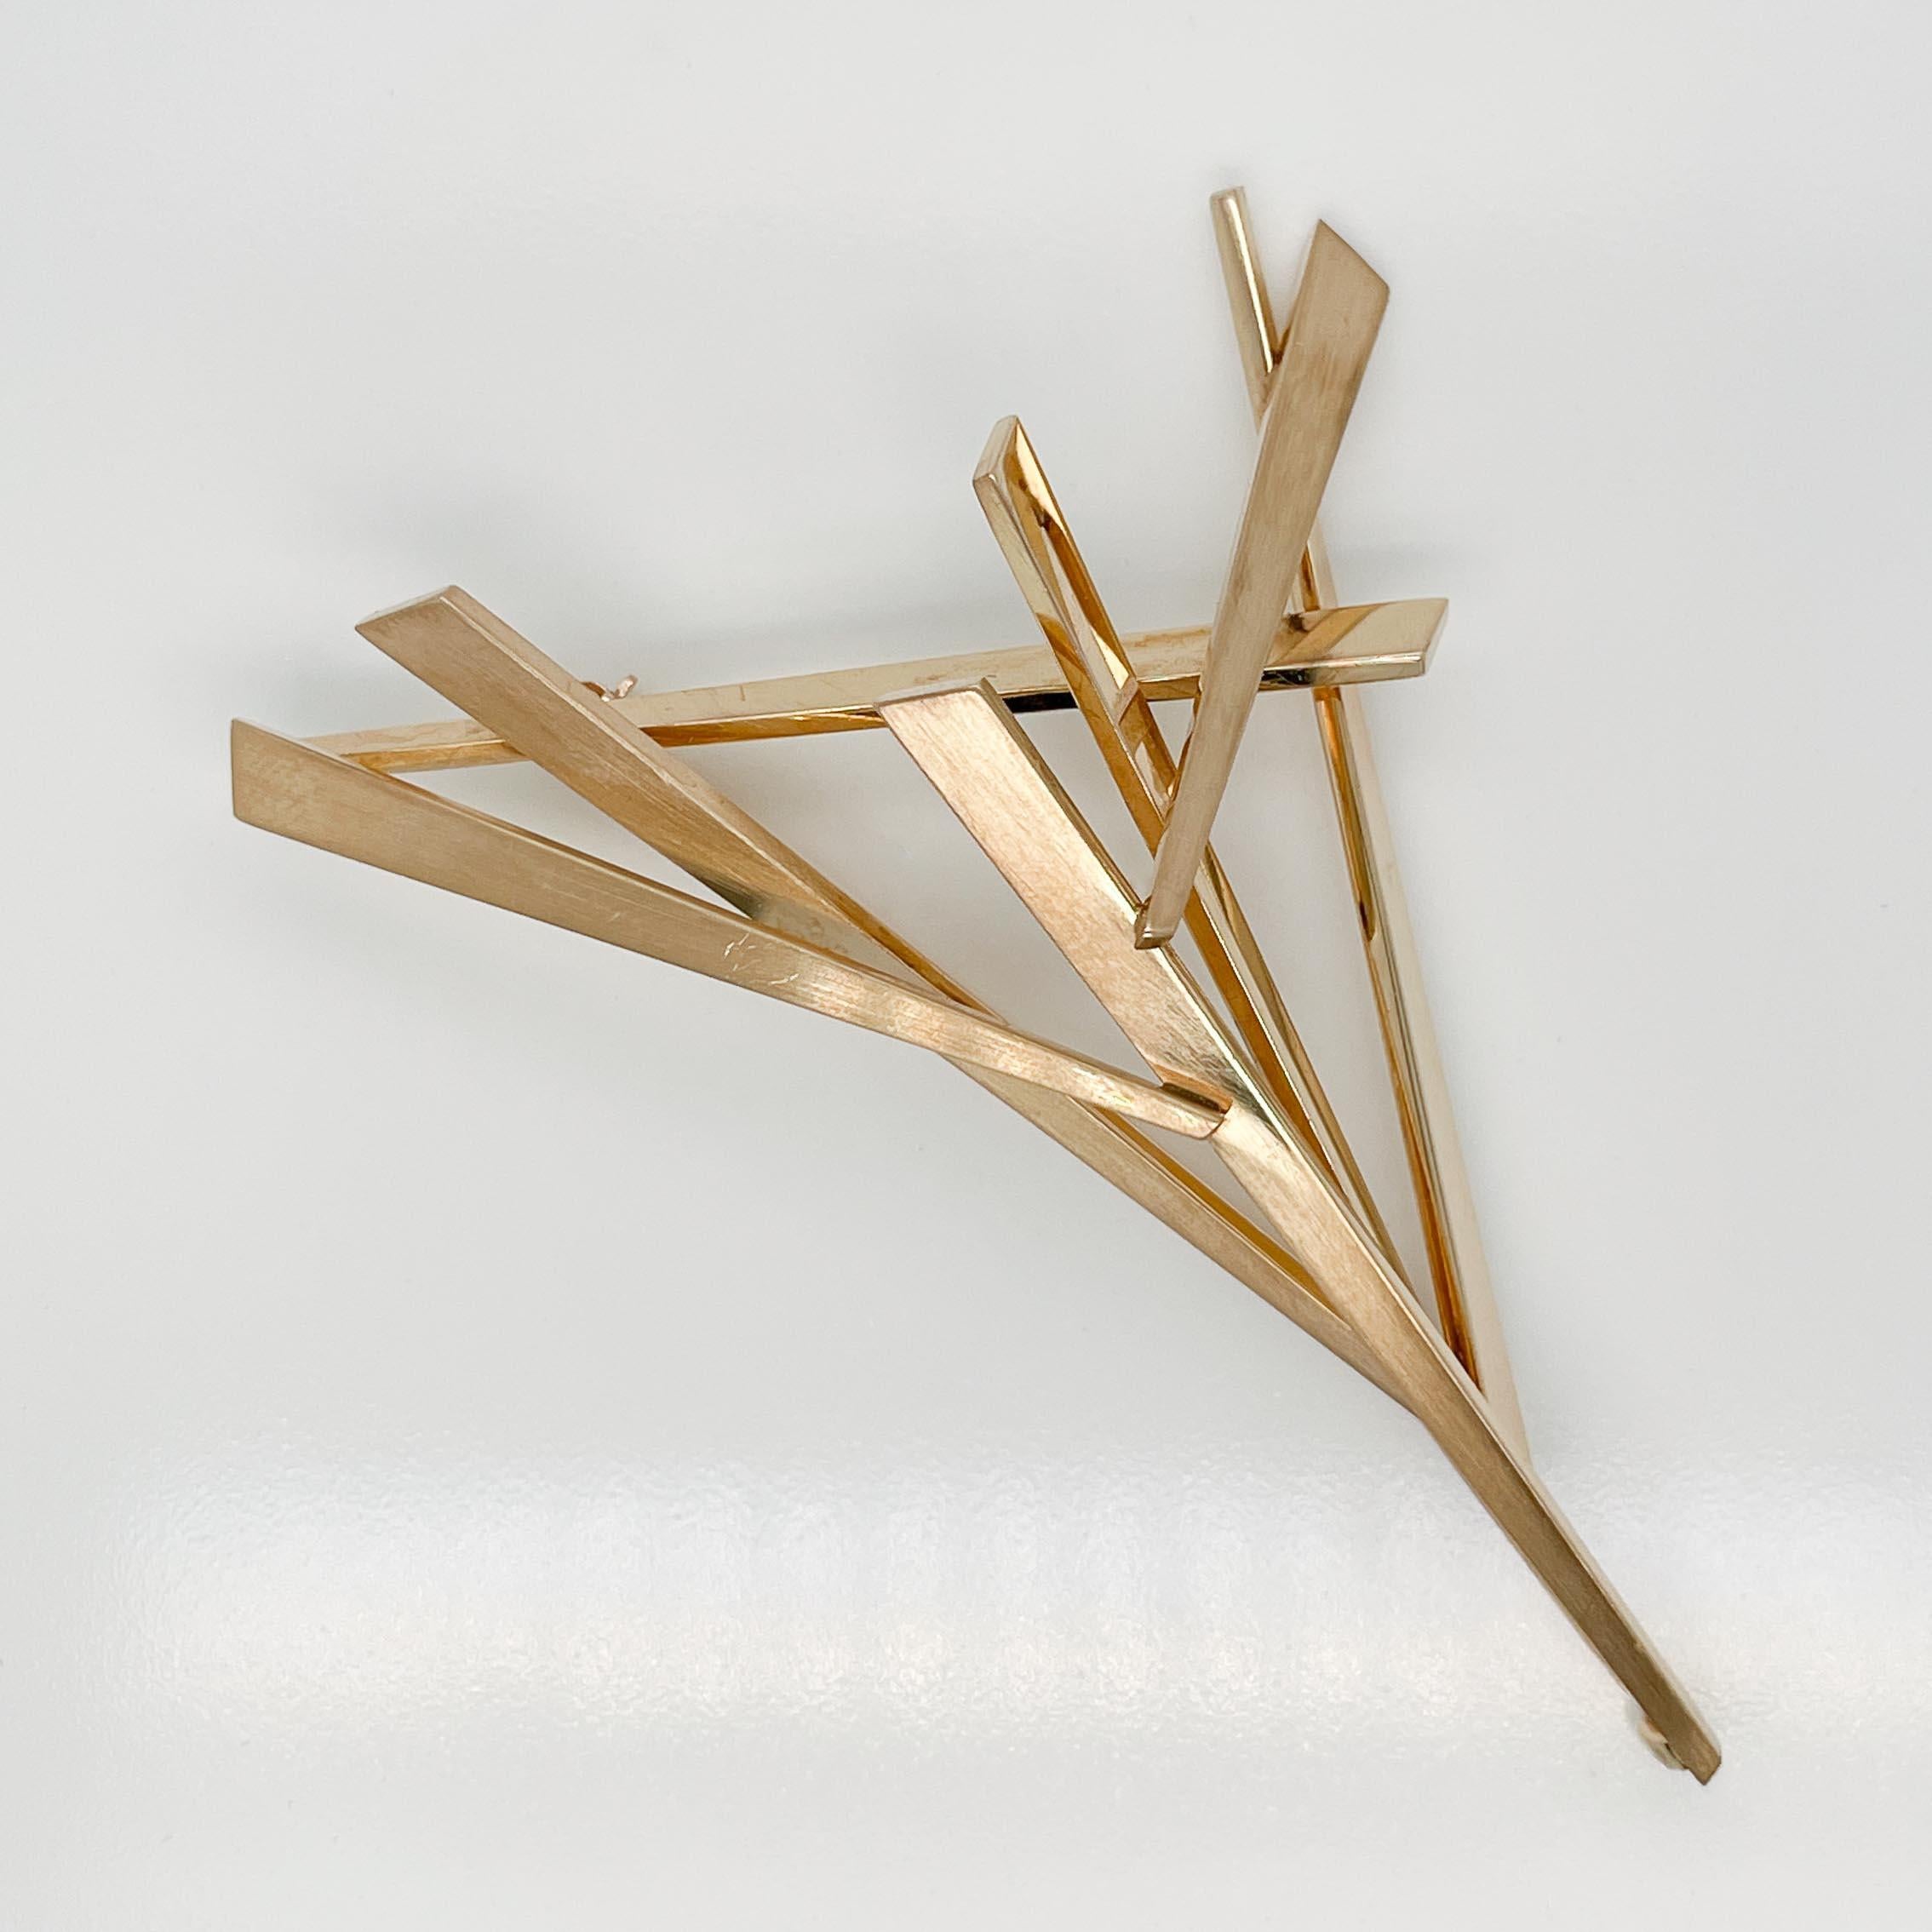 A fine Modernist 14k gold brooch.

By Charlie March.

In 14k gold

With seven tapered solid 14k gold elements overlapping to form a triangular pattern. 

The design of this brooch looks different from every angle and perspective. 

Simply a